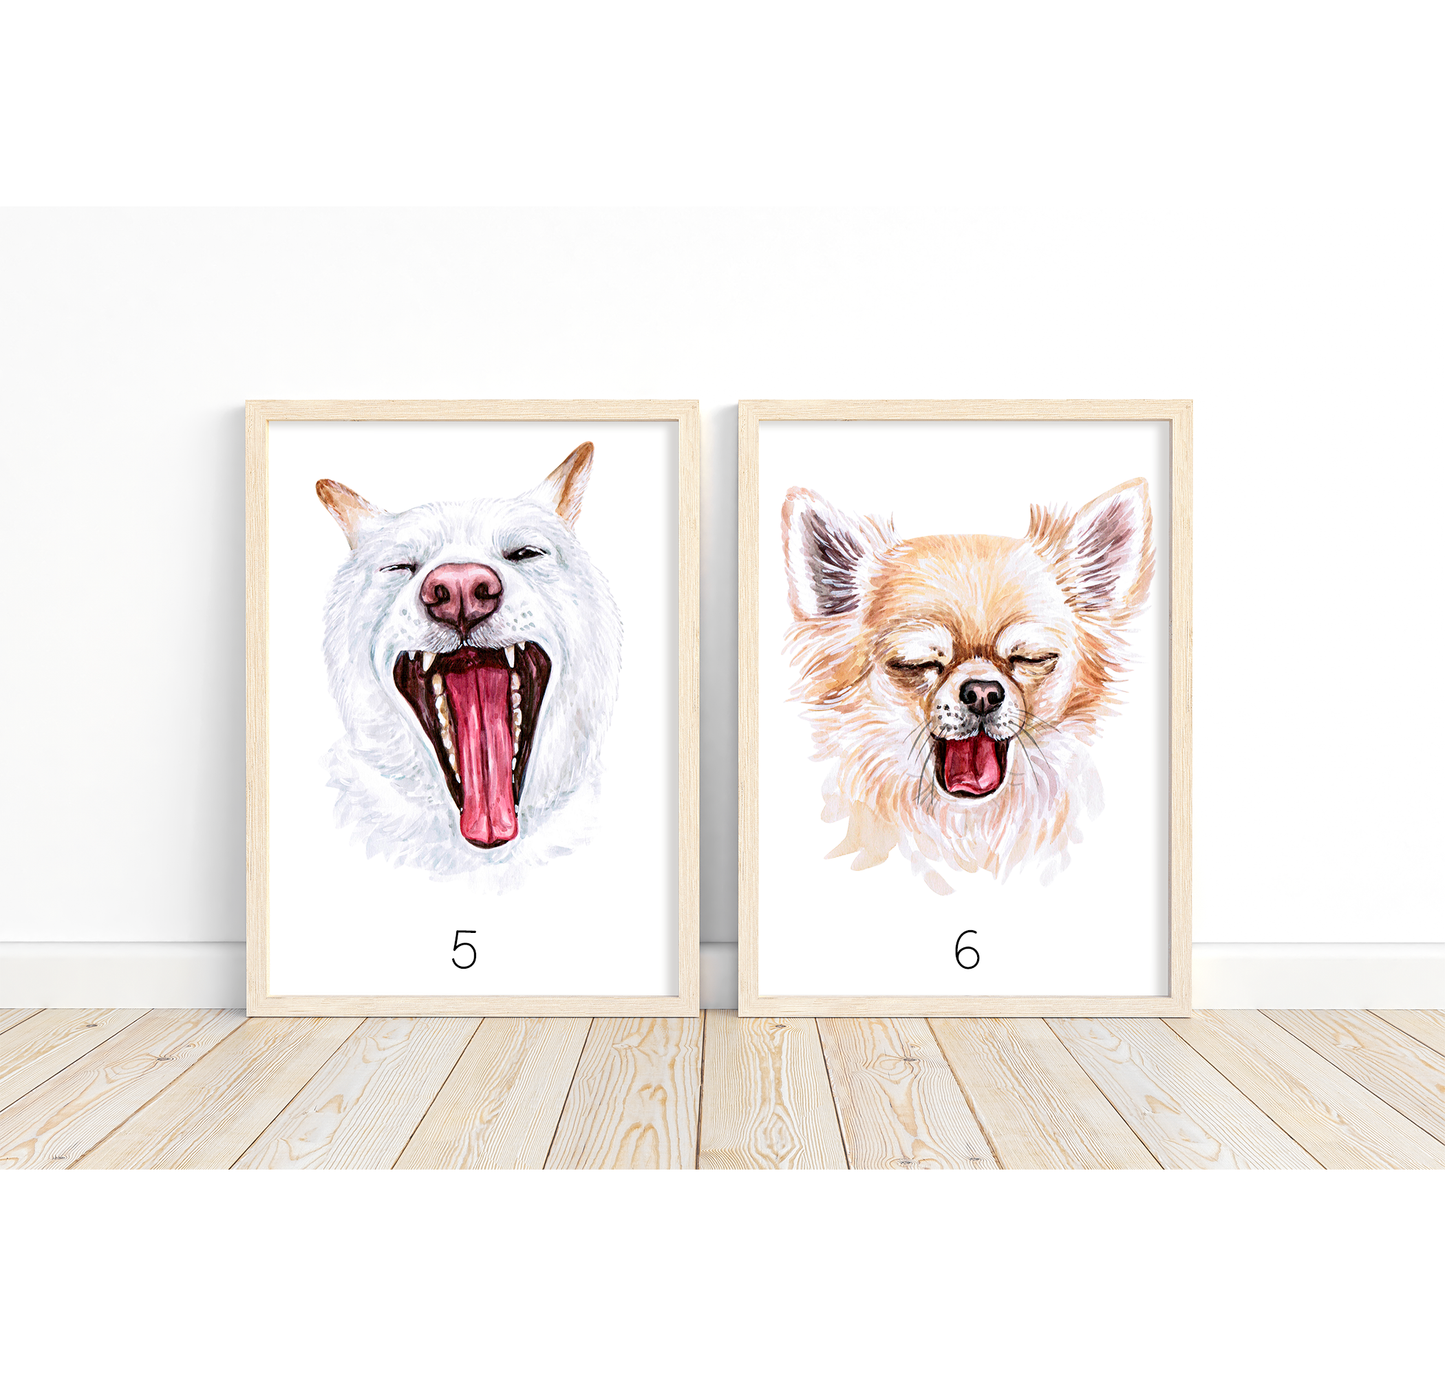 Yawning dog artwork - adorable portraits of dogs having a yawn with your own custom funny message | A4 | A5 | Greeting card